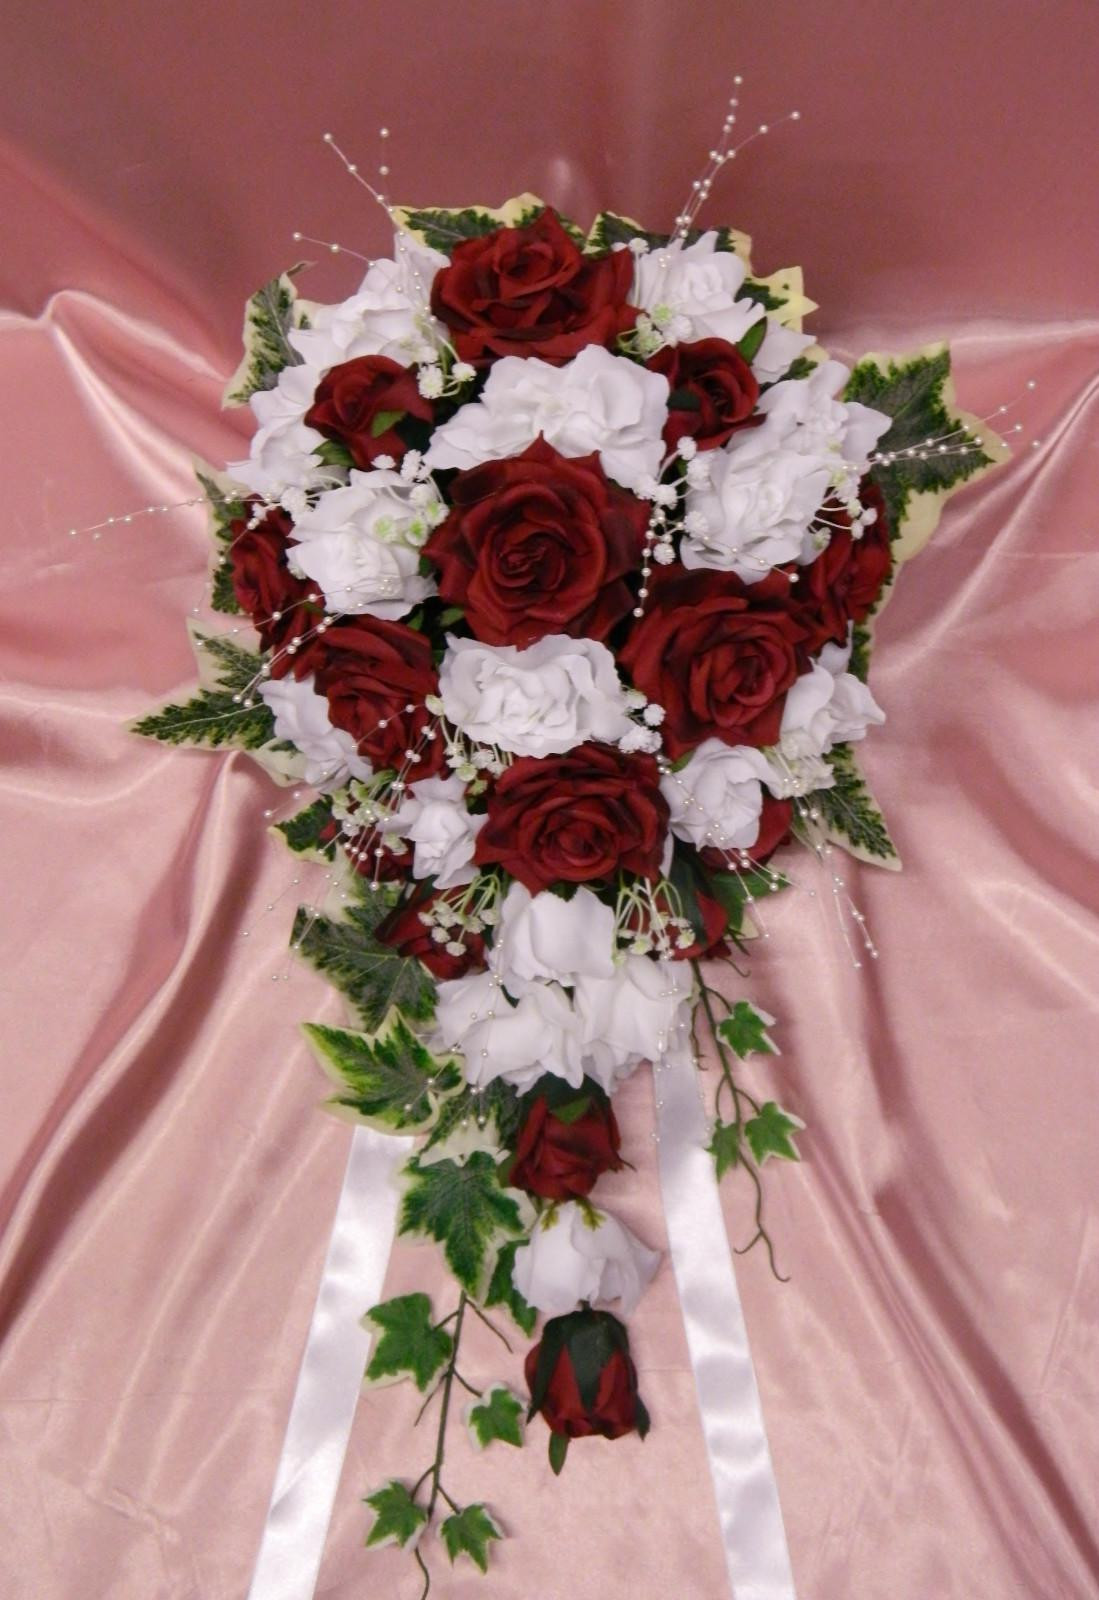 Cheap Wholesale Wedding Flowers
 Wholesale Silk Artificial Wedding Flowers Roses With Ivy